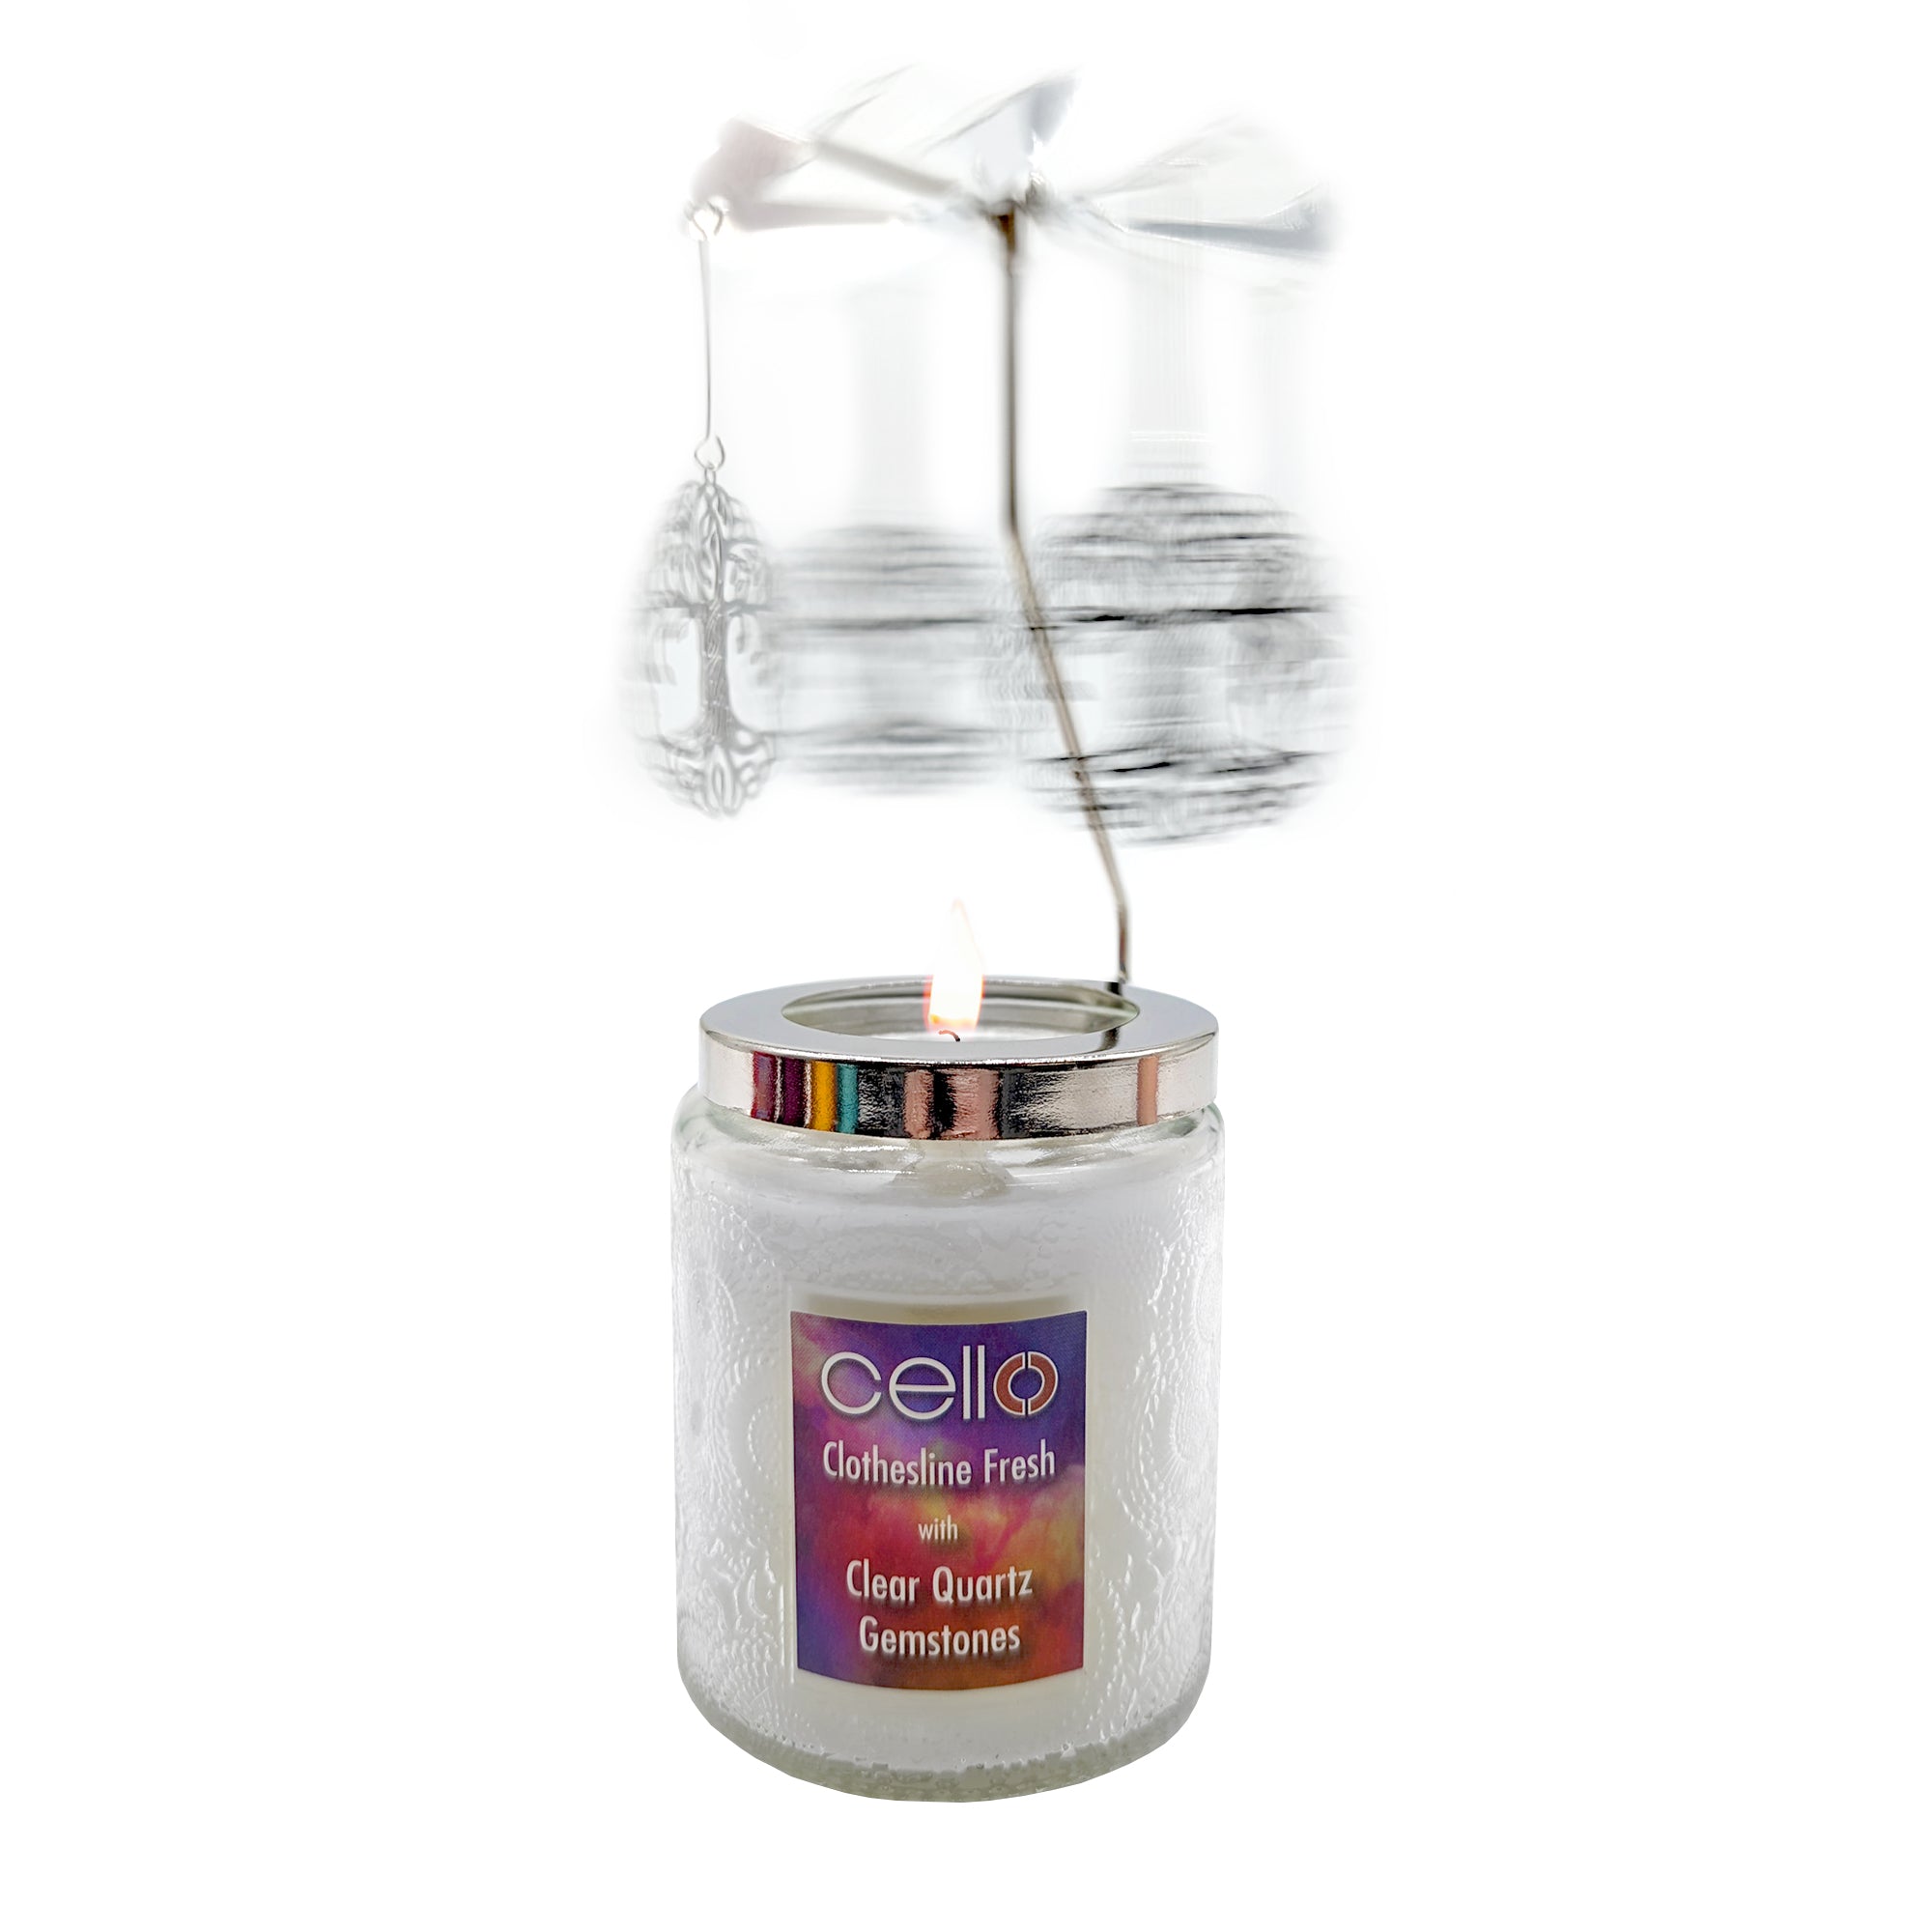 Cello - Gemstone Candle 200g with Convection Spinner - Clothesline Fresh with Clear Quartz